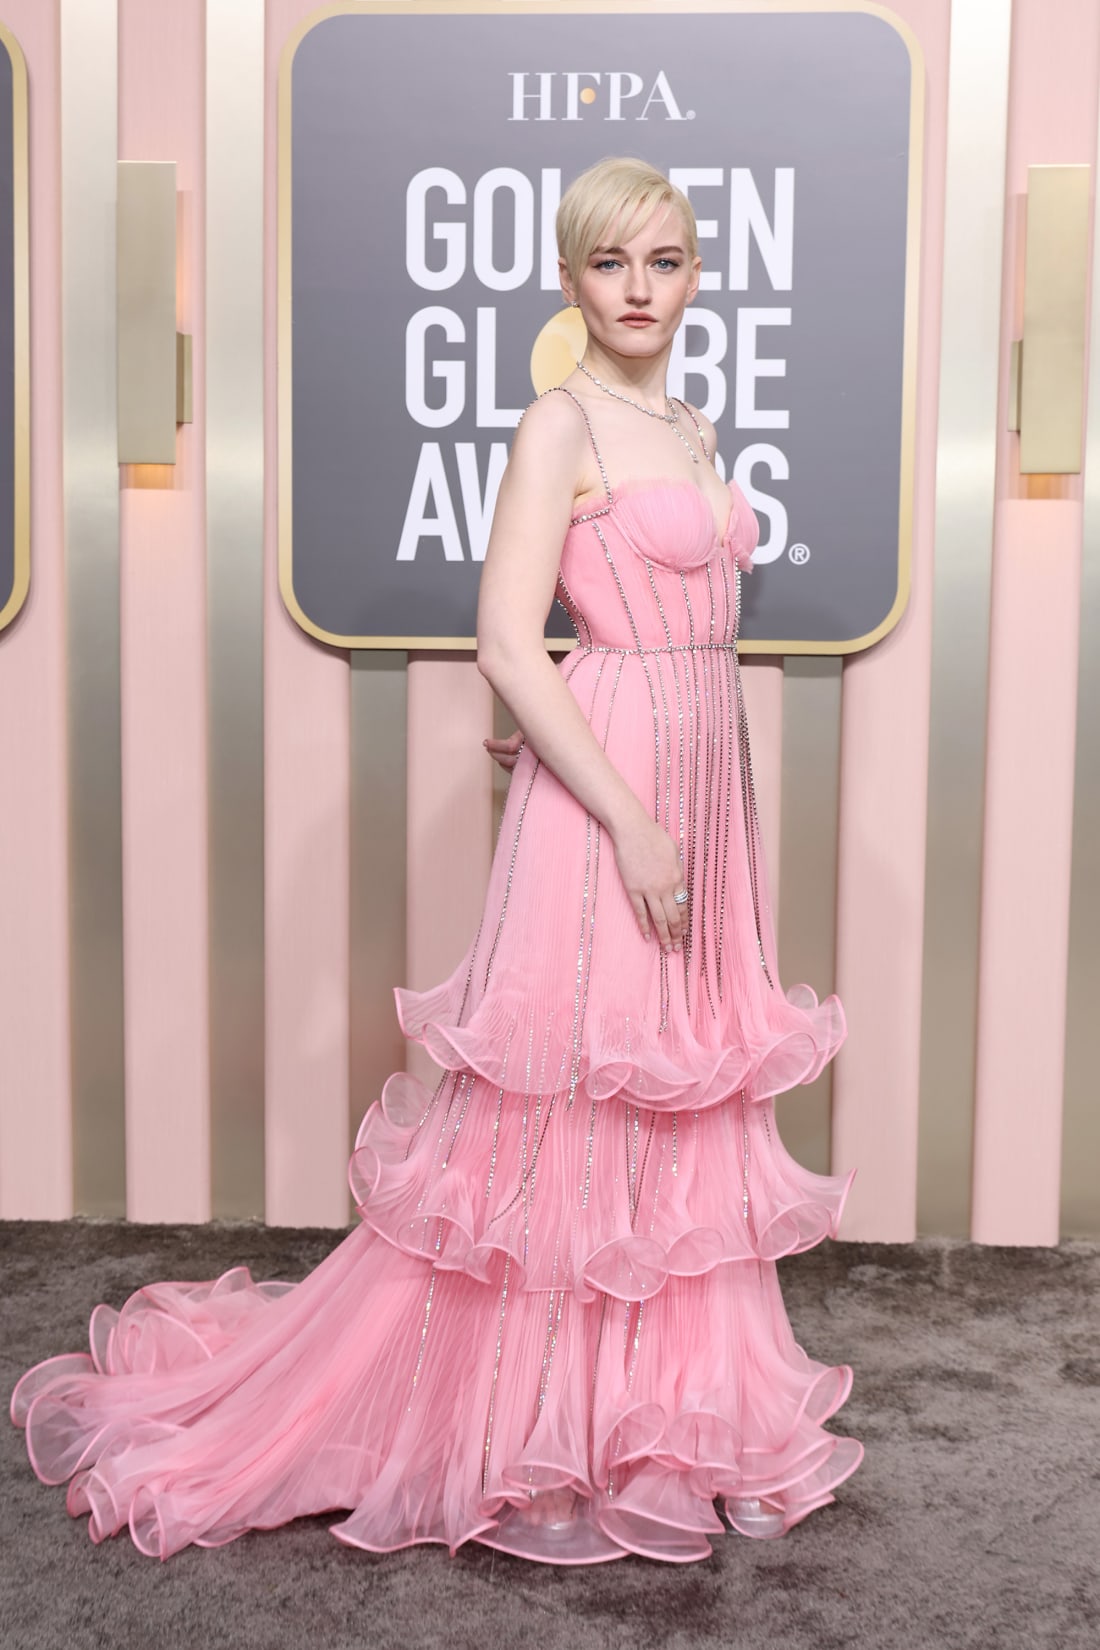 Double nominee Julia Garner in a three-tiered Gucci gown.